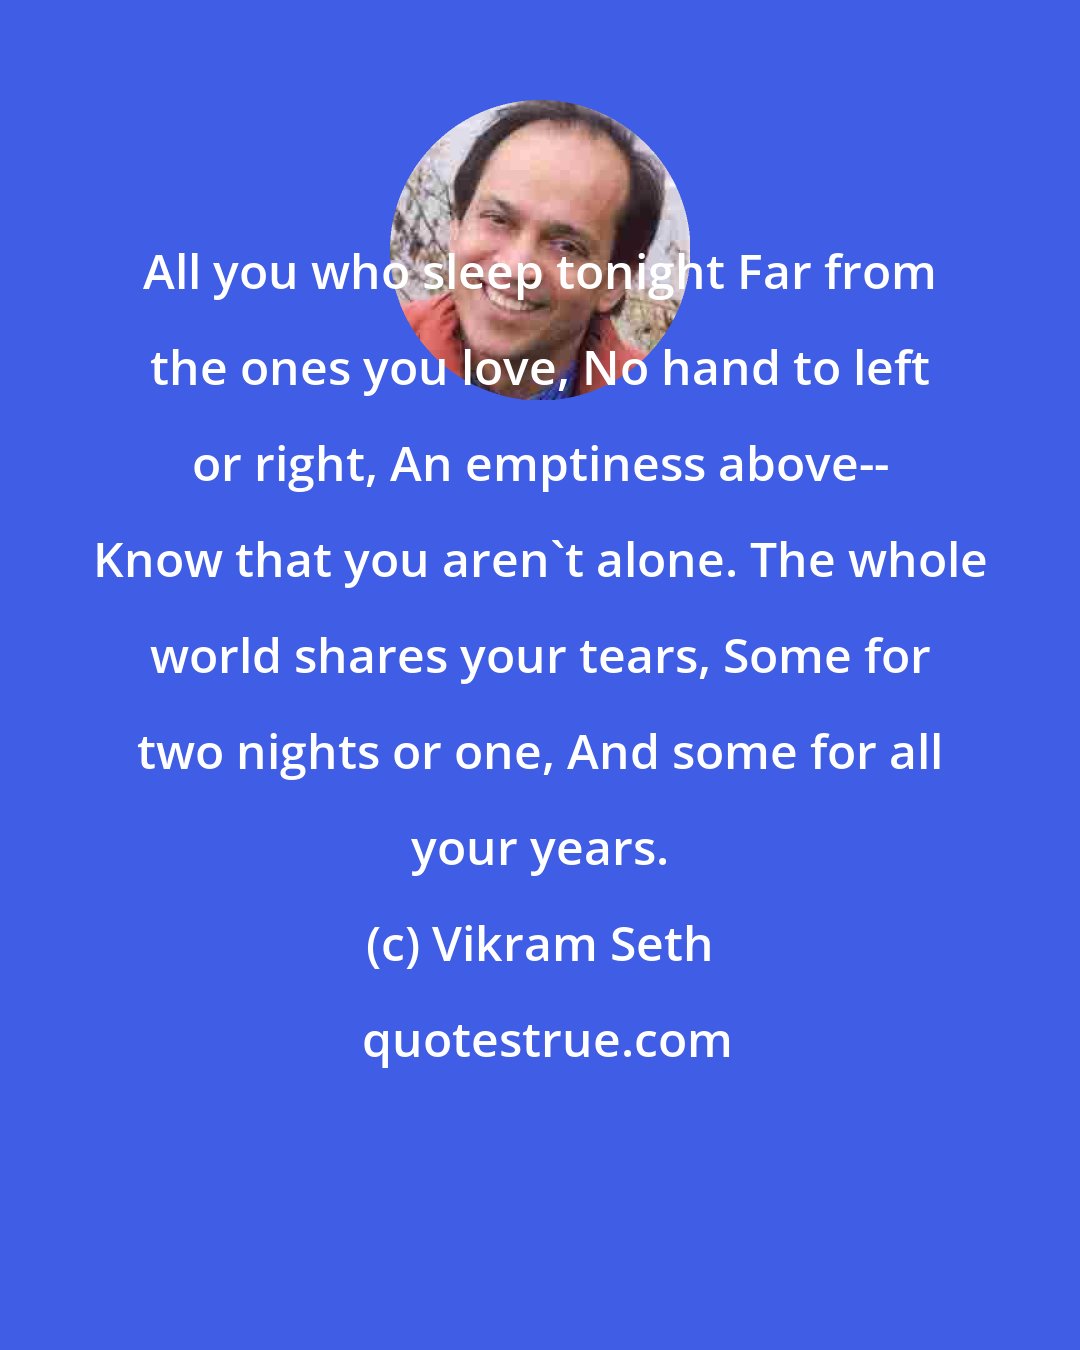 Vikram Seth: All you who sleep tonight Far from the ones you love, No hand to left or right, An emptiness above-- Know that you aren't alone. The whole world shares your tears, Some for two nights or one, And some for all your years.